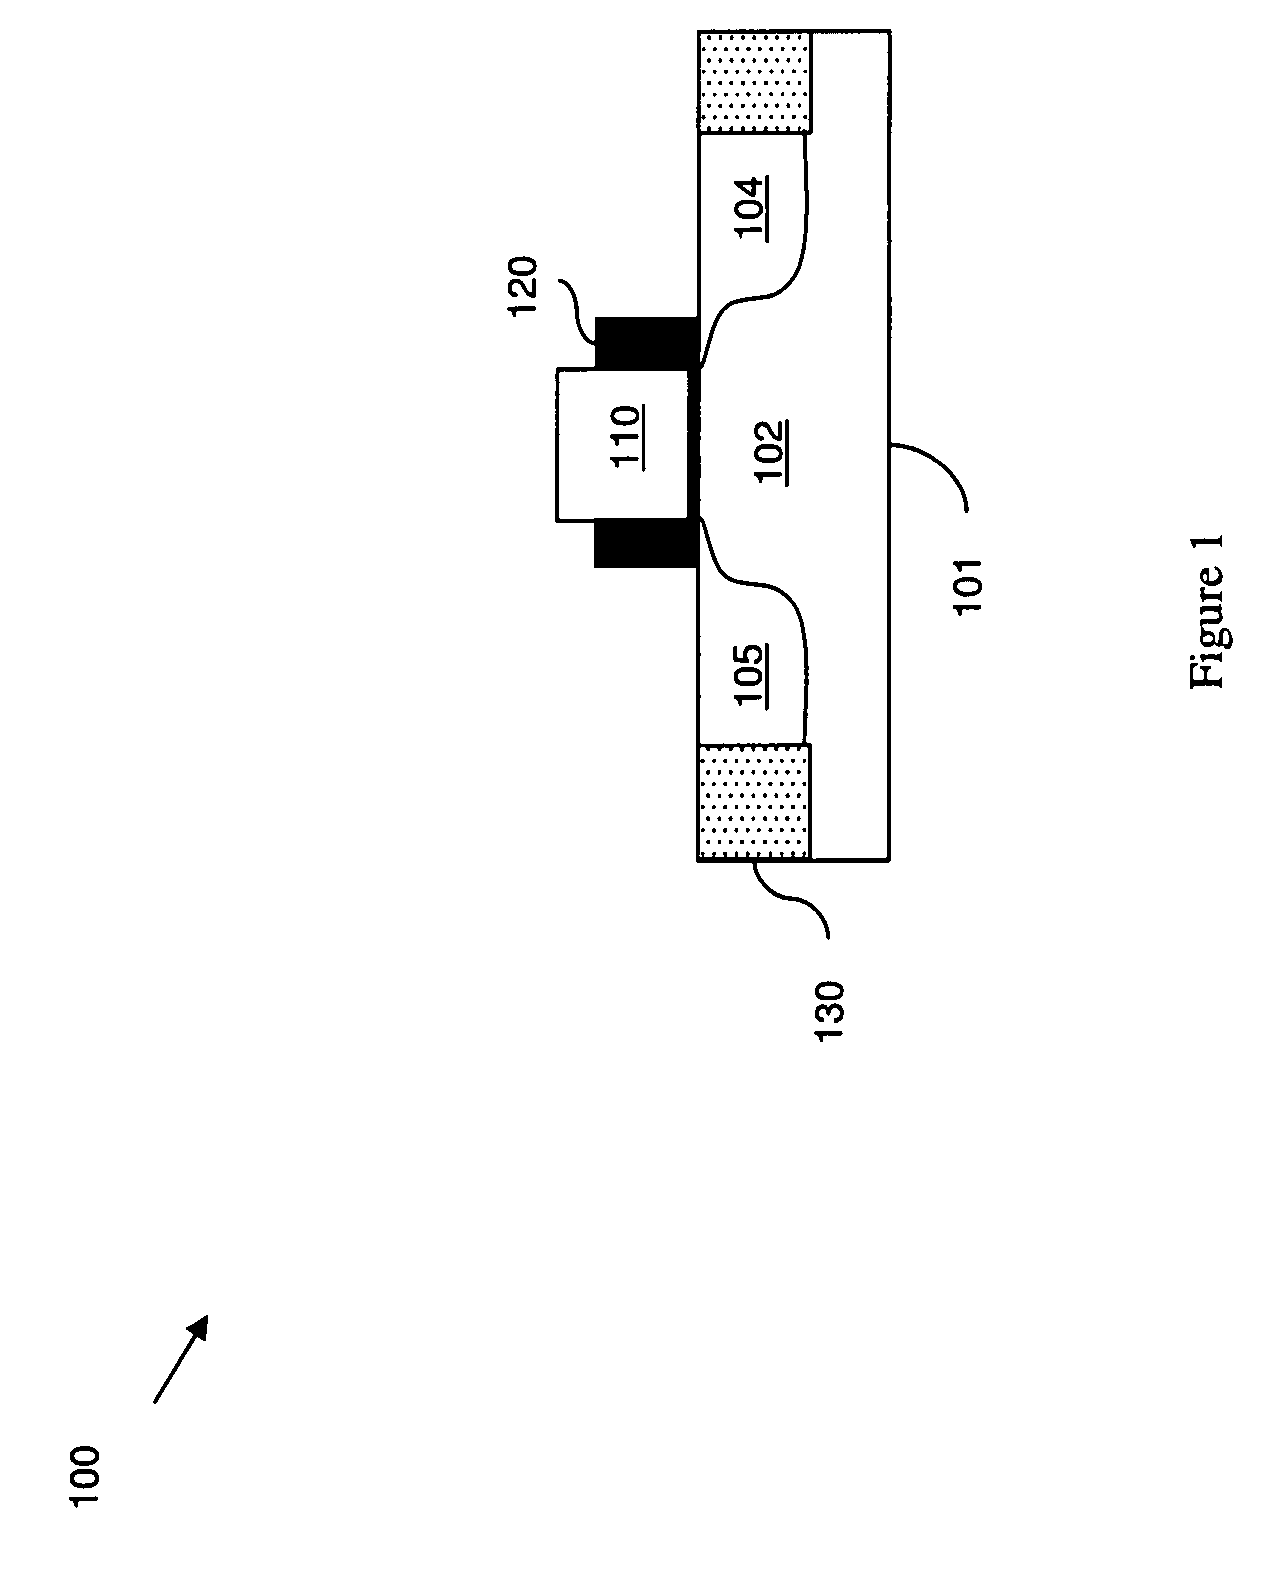 Asymmetric field effect transistor structure and method